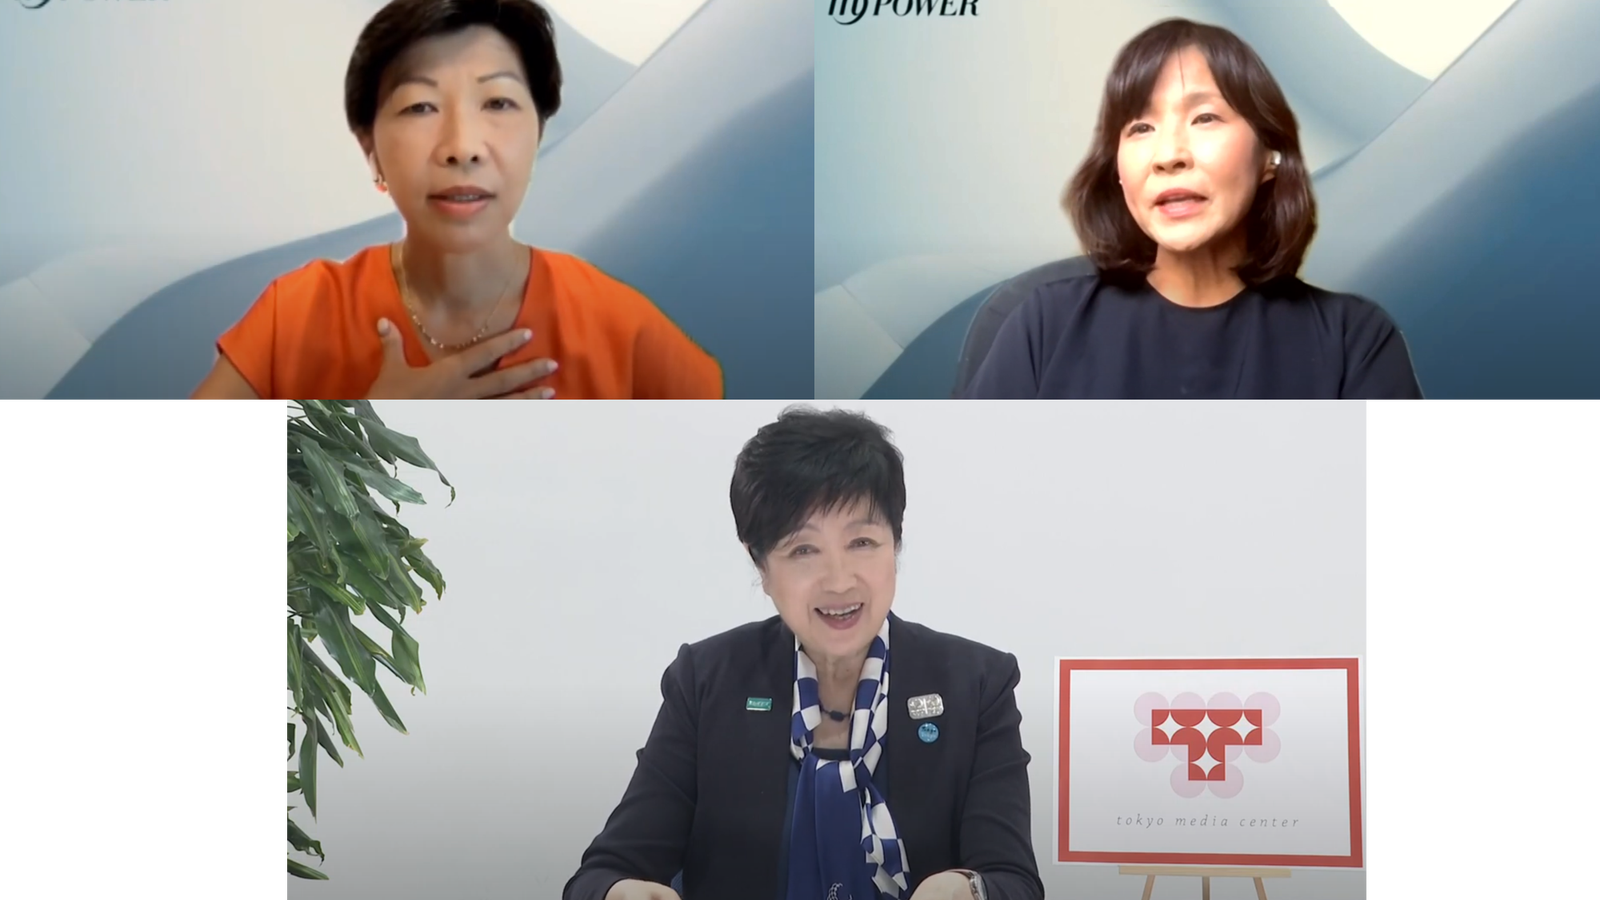 Women’s Leadership and Empowerment: Challenges from Japan’s Ranking as 120th in the World ｜ TMC Talks Vol.6